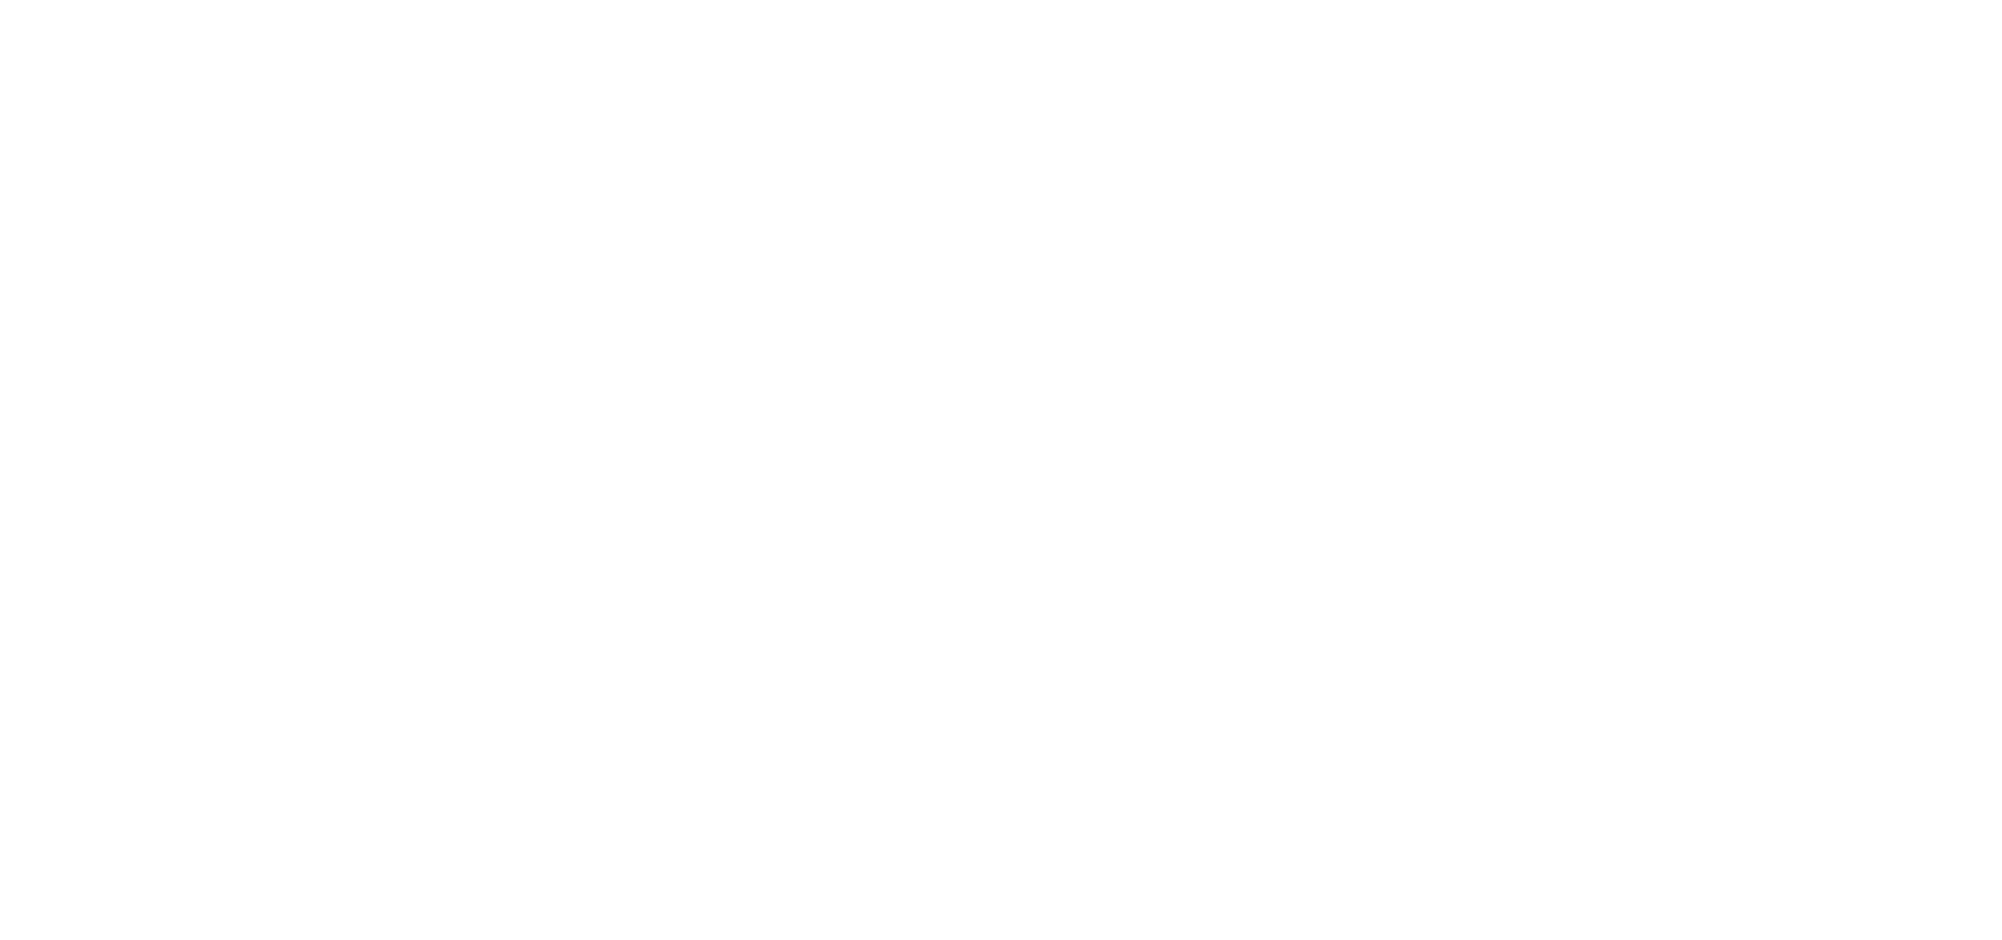 THESSALY SEMPER TA KEDA THESSALY